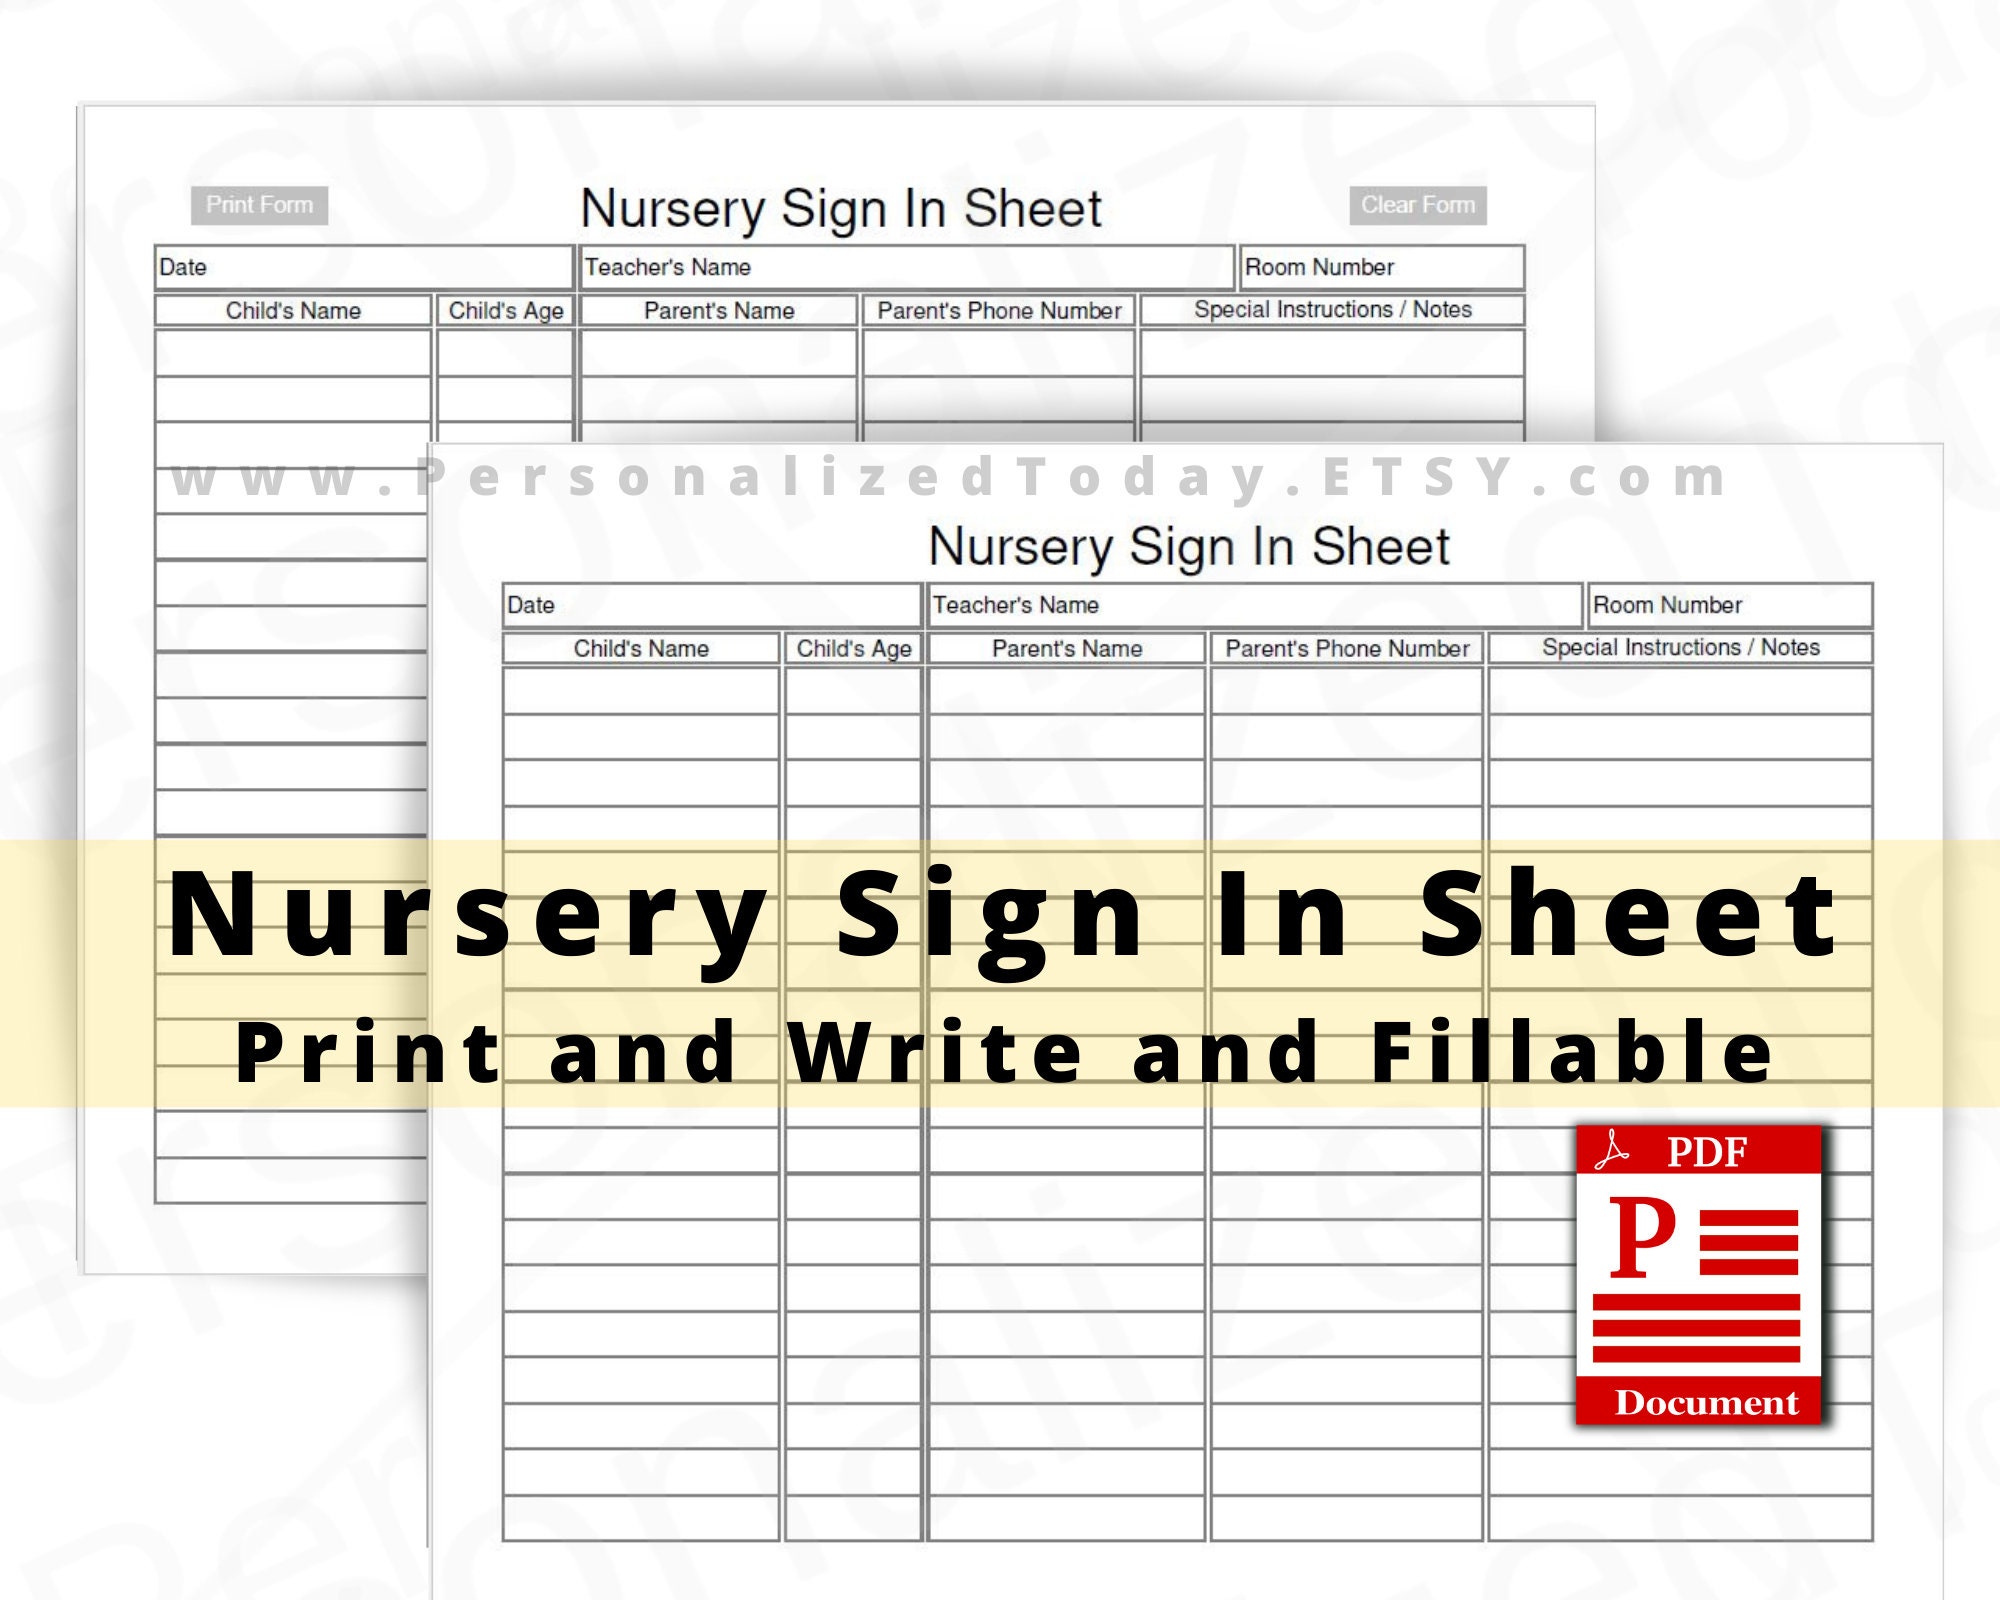 Church Nursery Sign in Sheet Fillable and Print and Write PDF Etsy